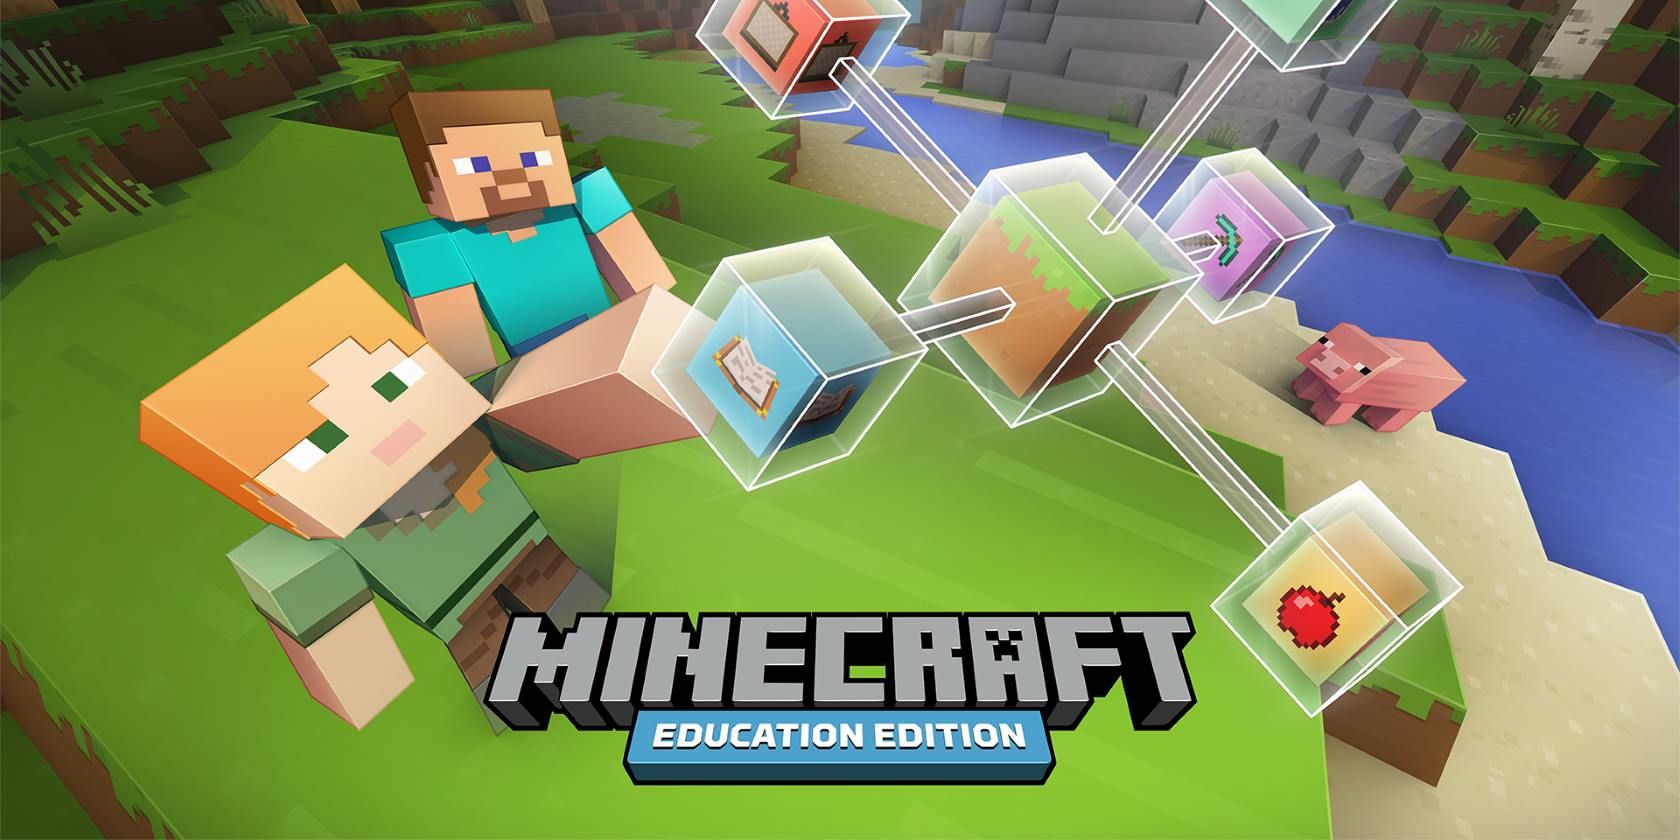 The official Minecraft Education Edition logo